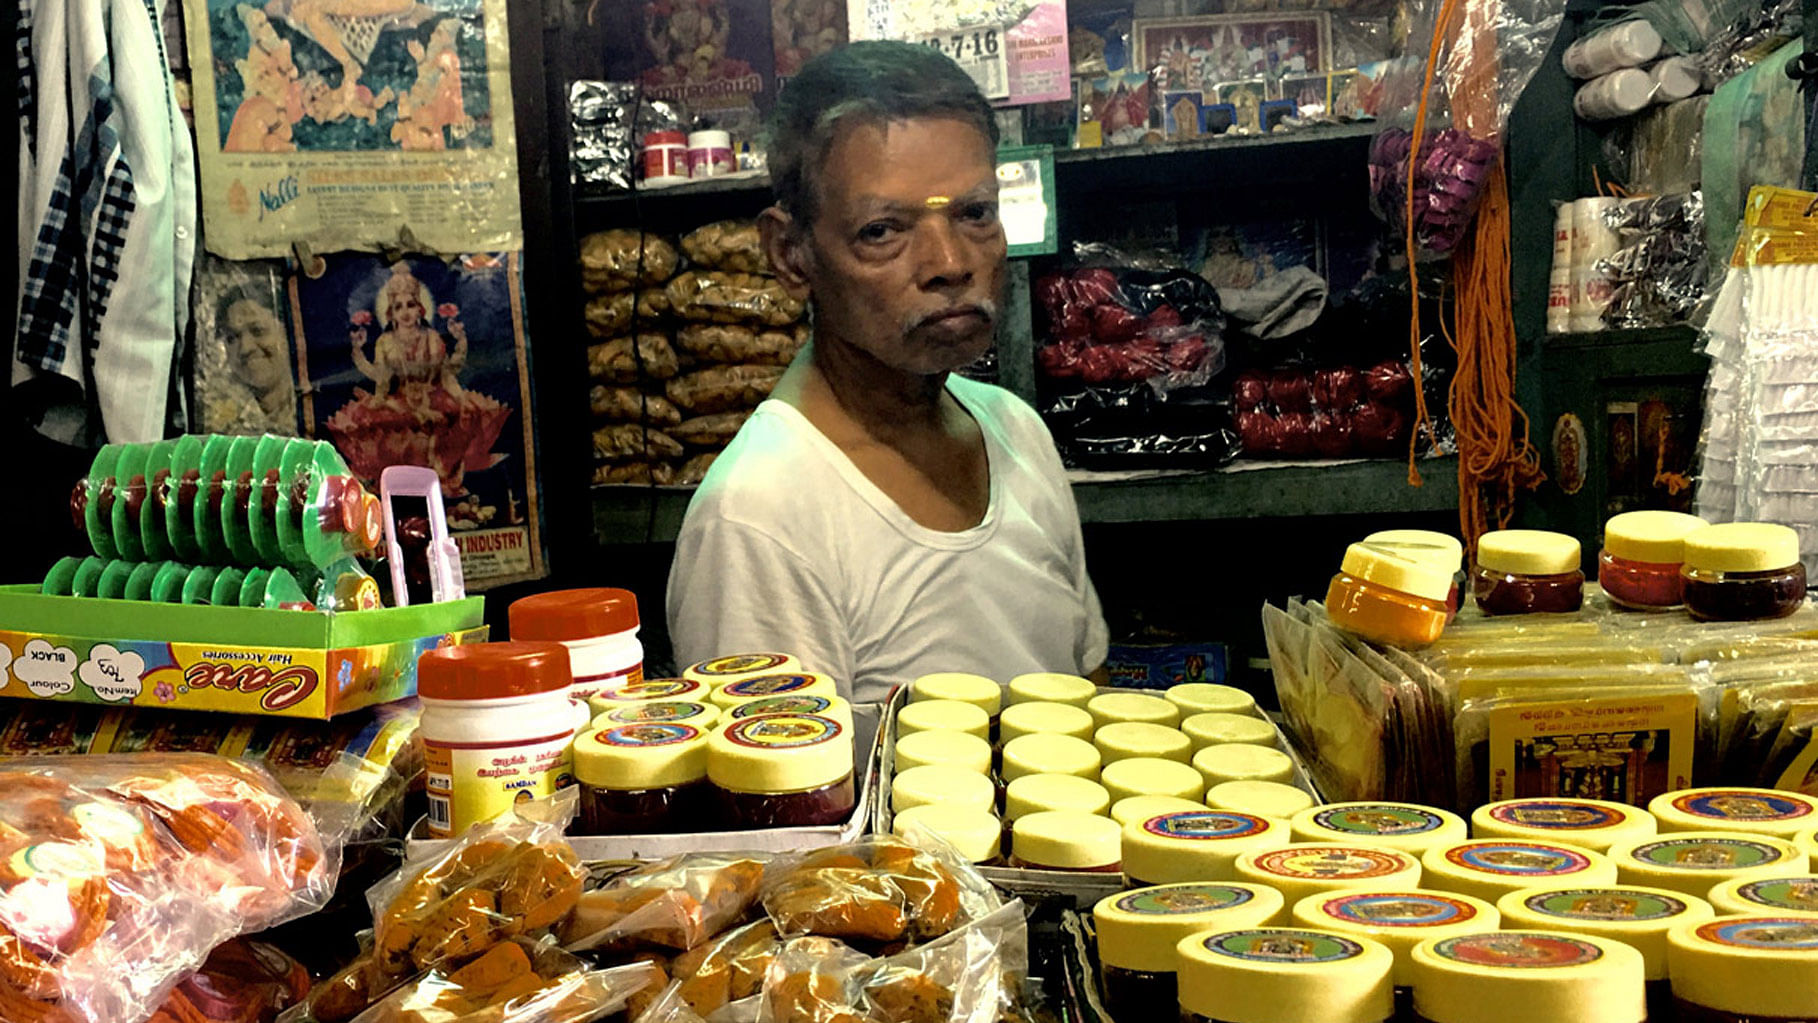 ‘Got Turmeric?’ : A shopkeeper at the <i>Puthu Mandapam </i>in Madurai. His is one among hundreds of tiny shops that sell curiosities and clothes. (Photo: Vikram Venkateswaran/<b>The Quint</b>)